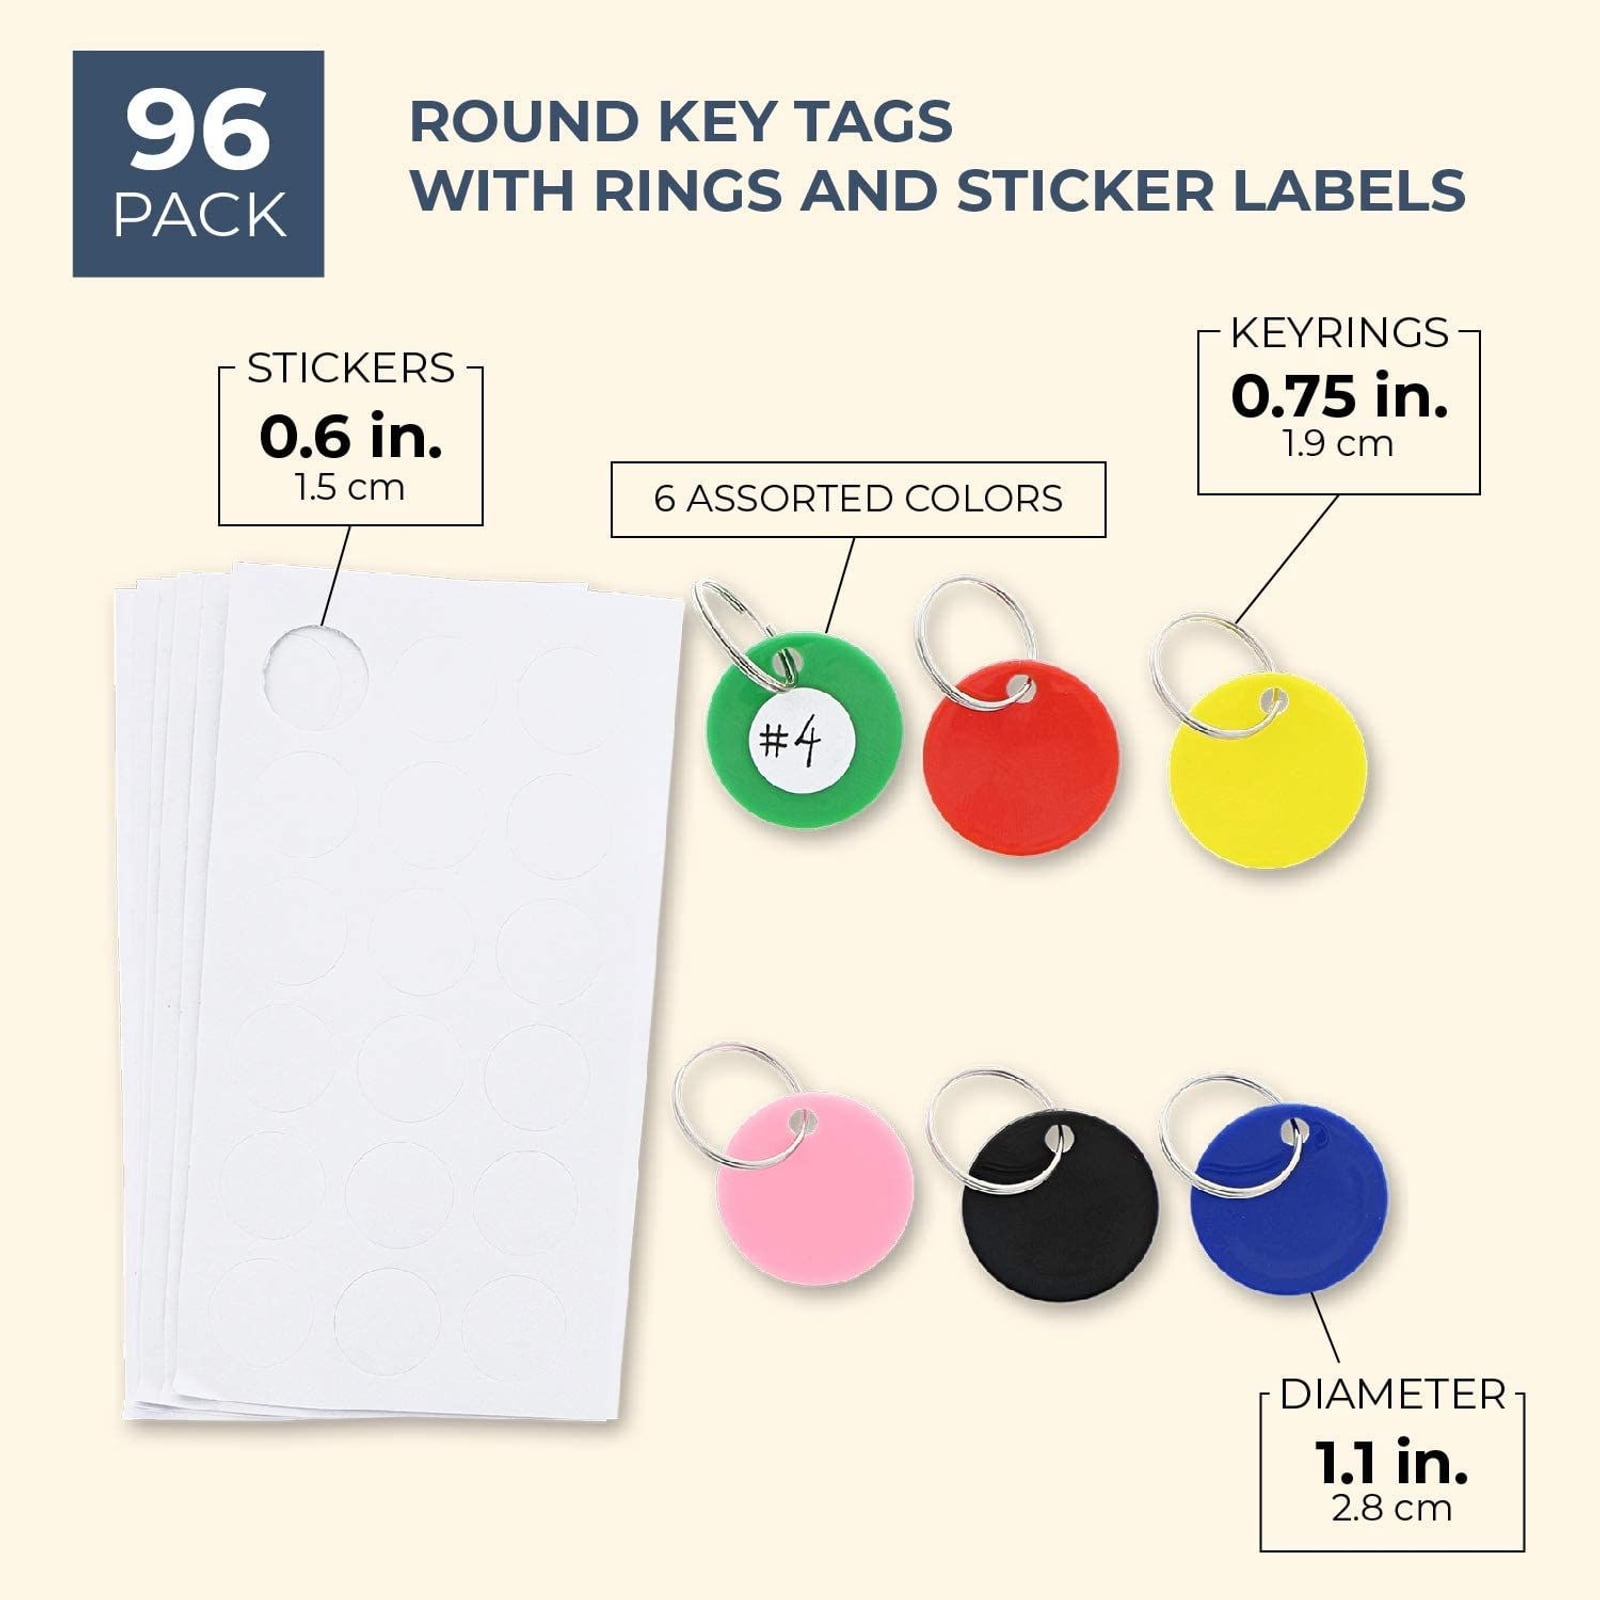 96 Pack Juvale Round Key Tags with Split Rings and White Sticker Labels White 